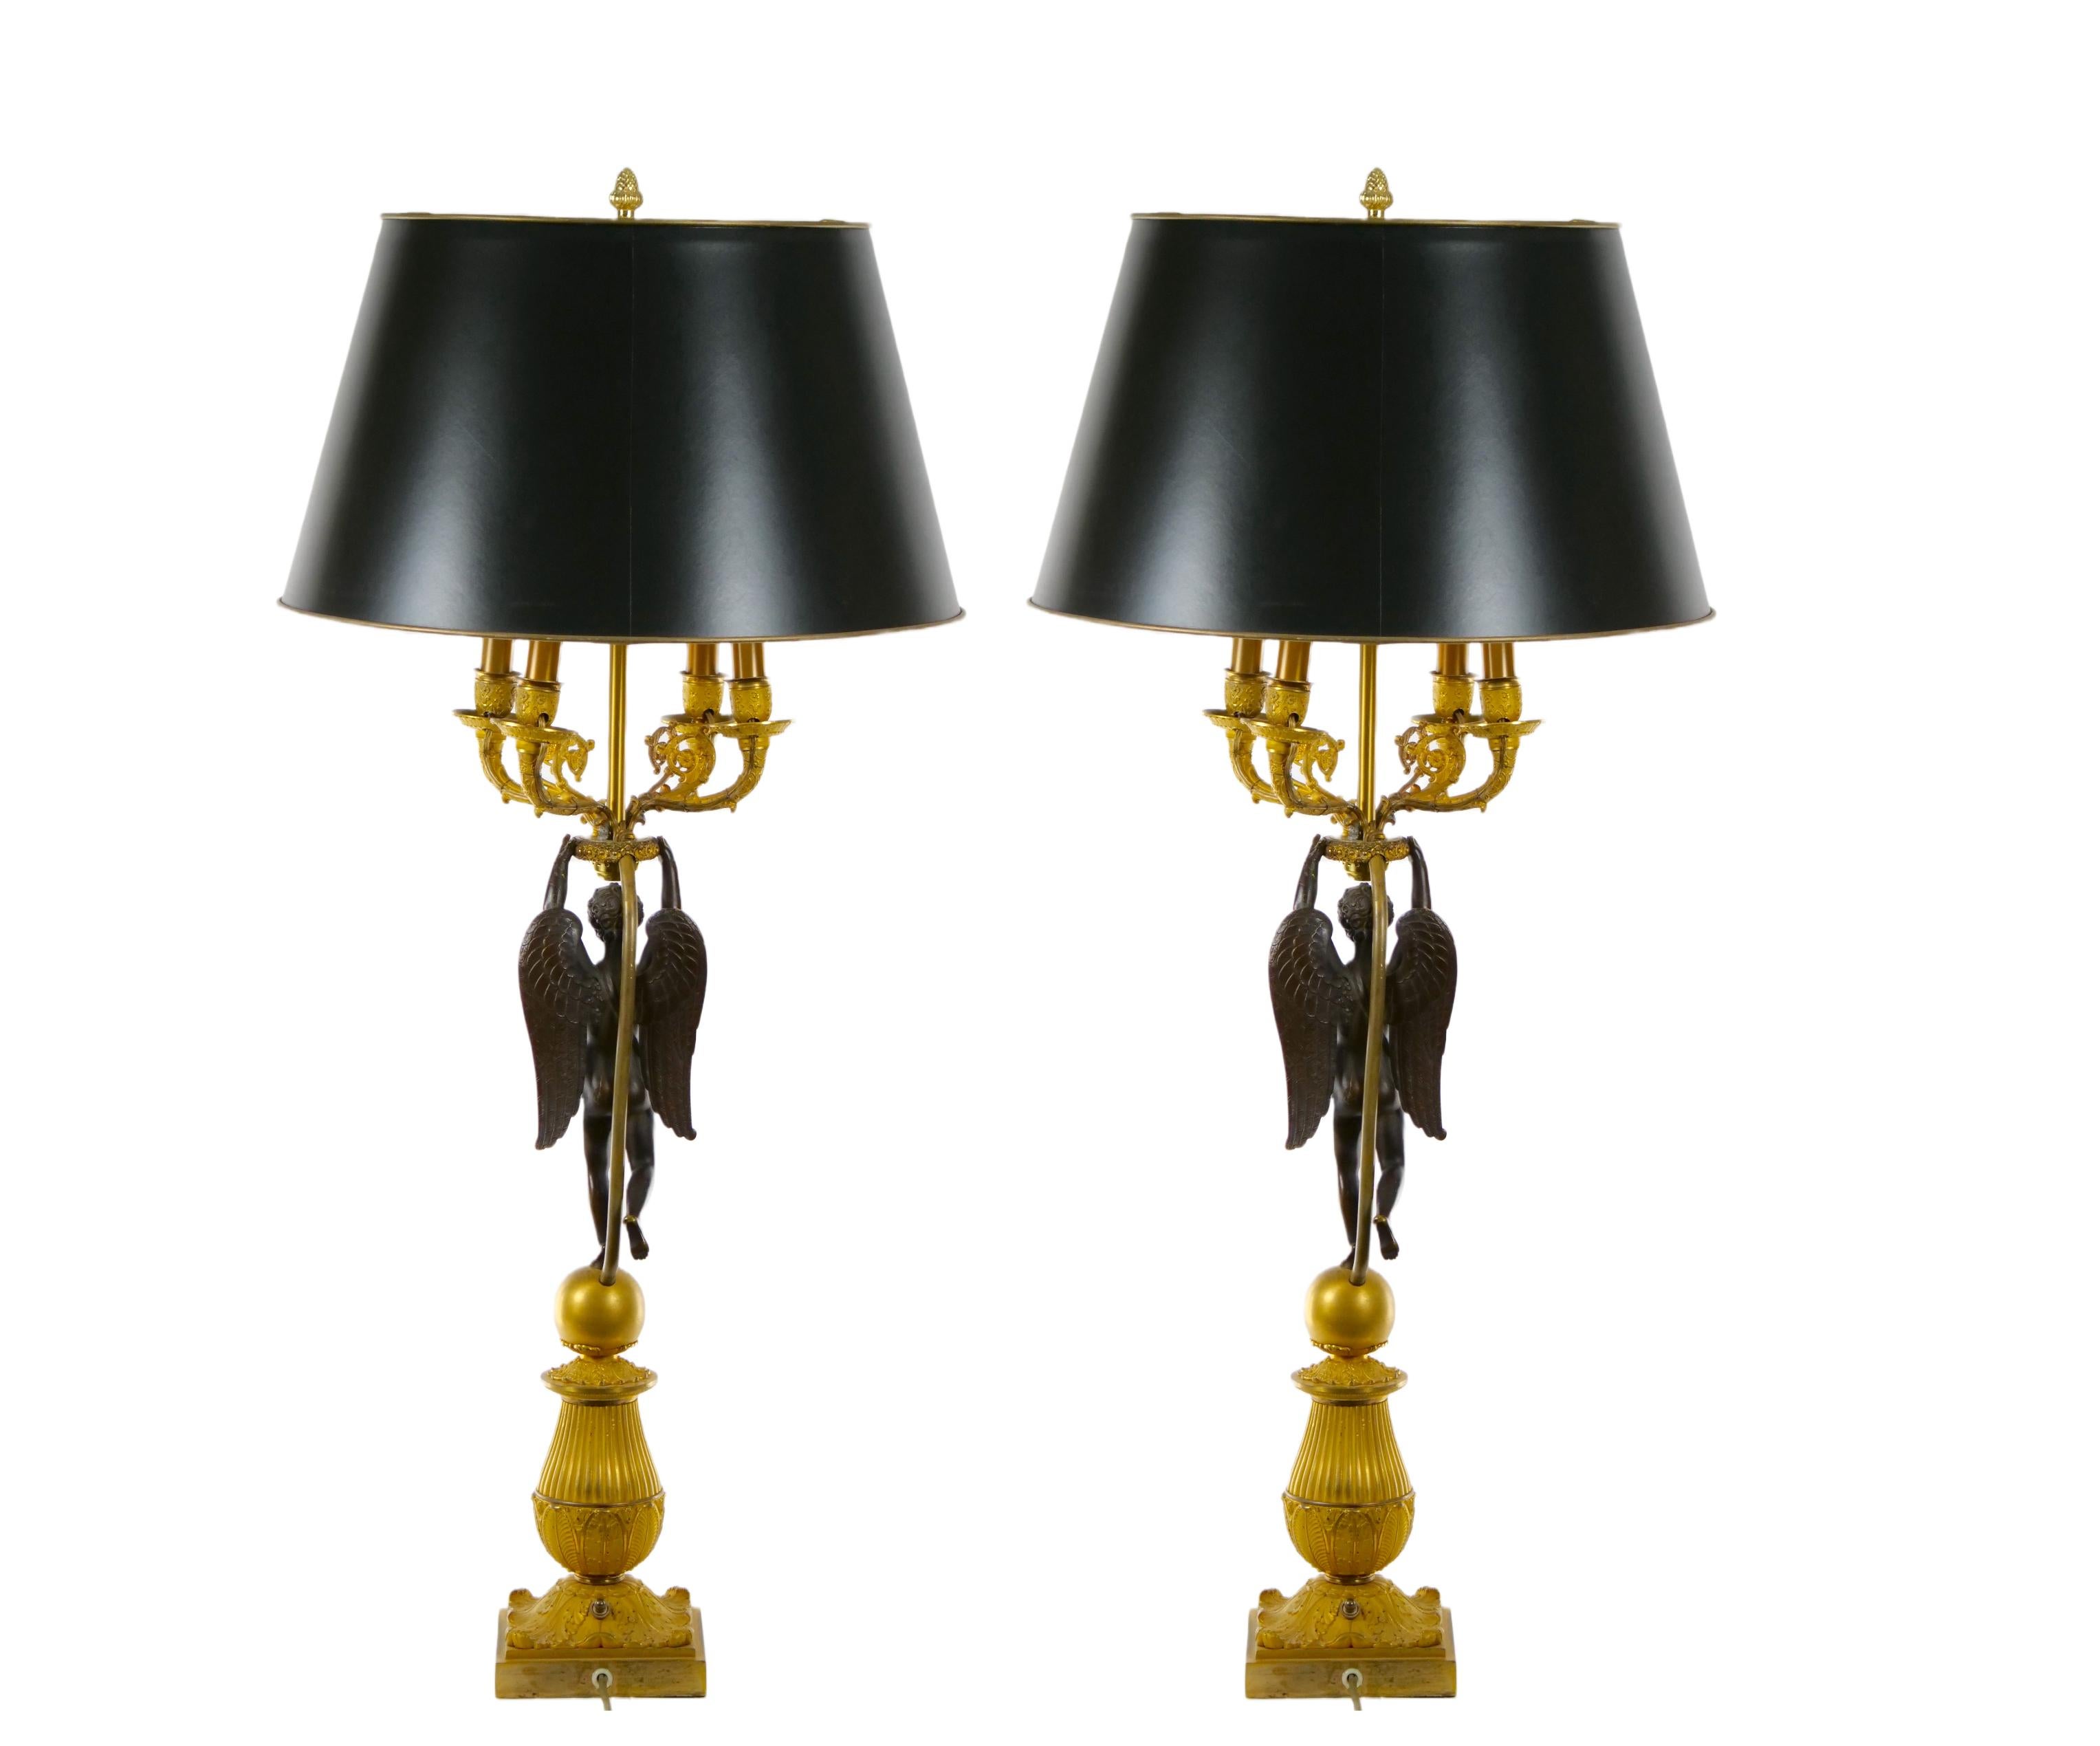 Wonderful pair of French Napoleon III Empire style gilt doré and patinated bronze neoclassical four-arm candelabra with finely cast decorated detail. Each lamp features a classical winged putti figure positioned on a round ball mounted on a tiered